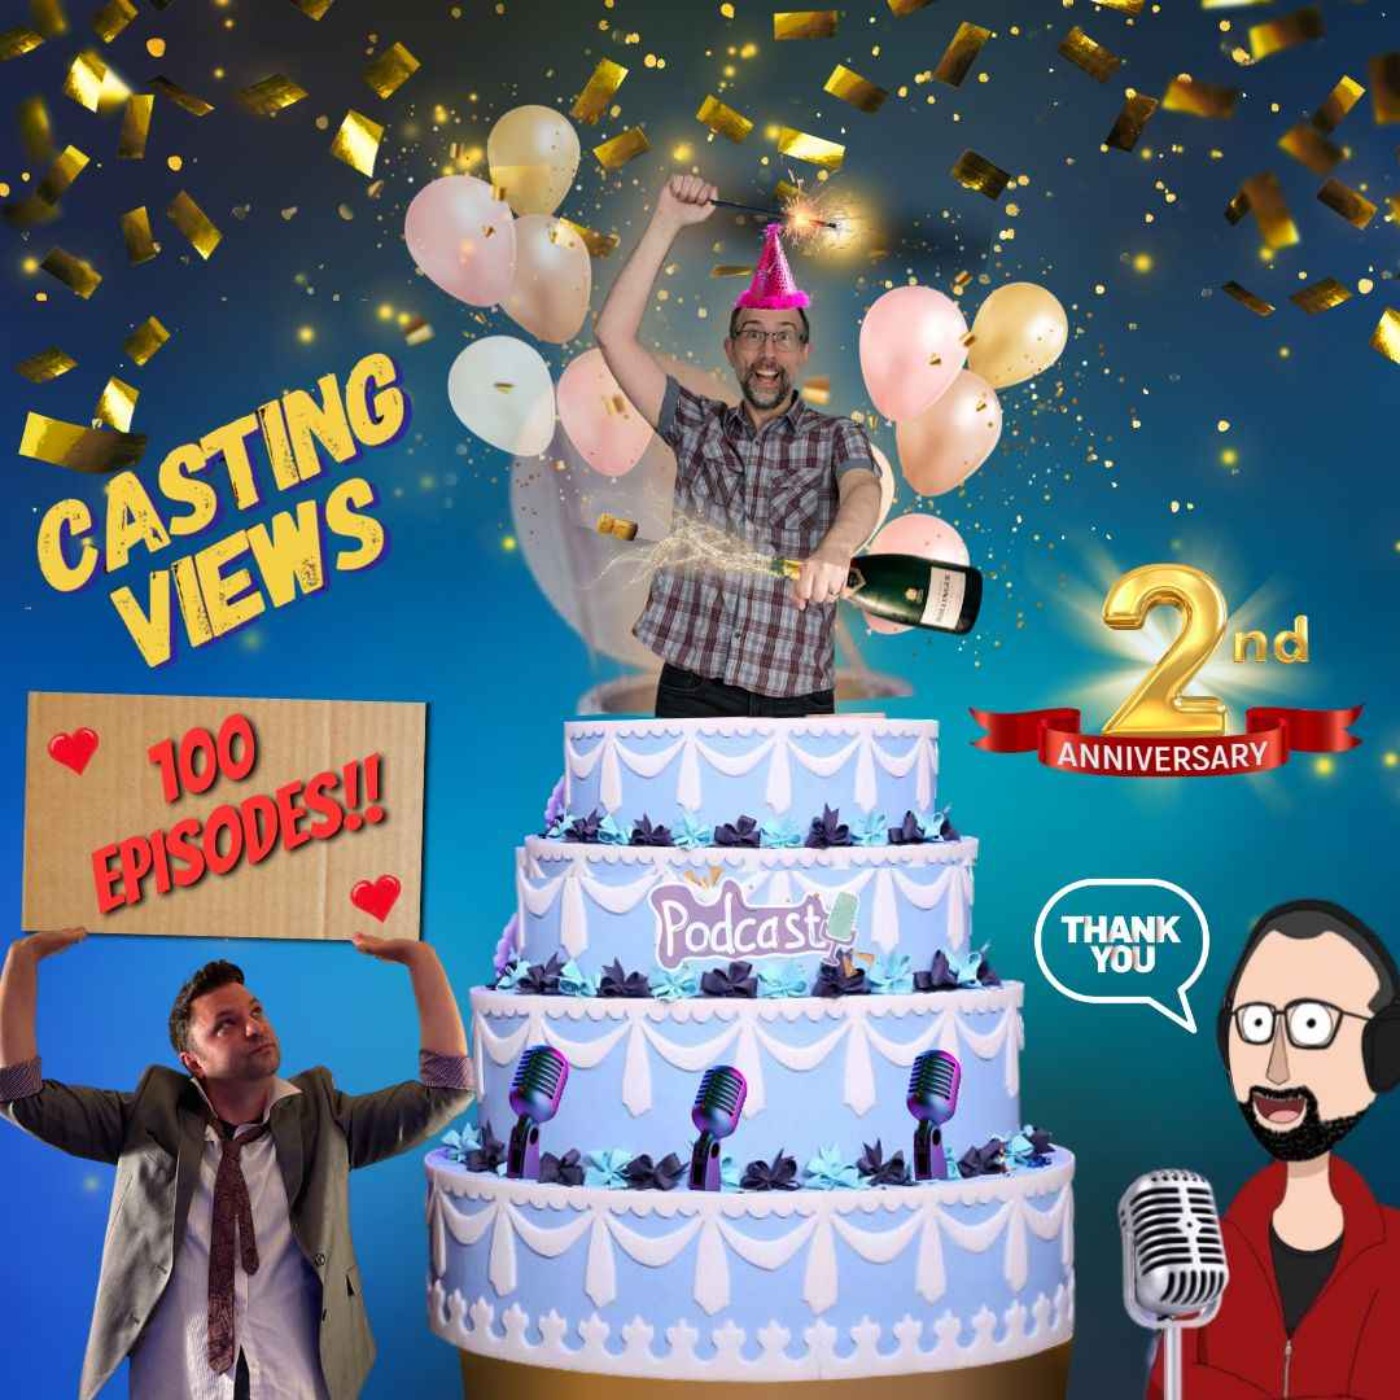 cover art for 100 Episodes and 2 year Podiversary celebration!